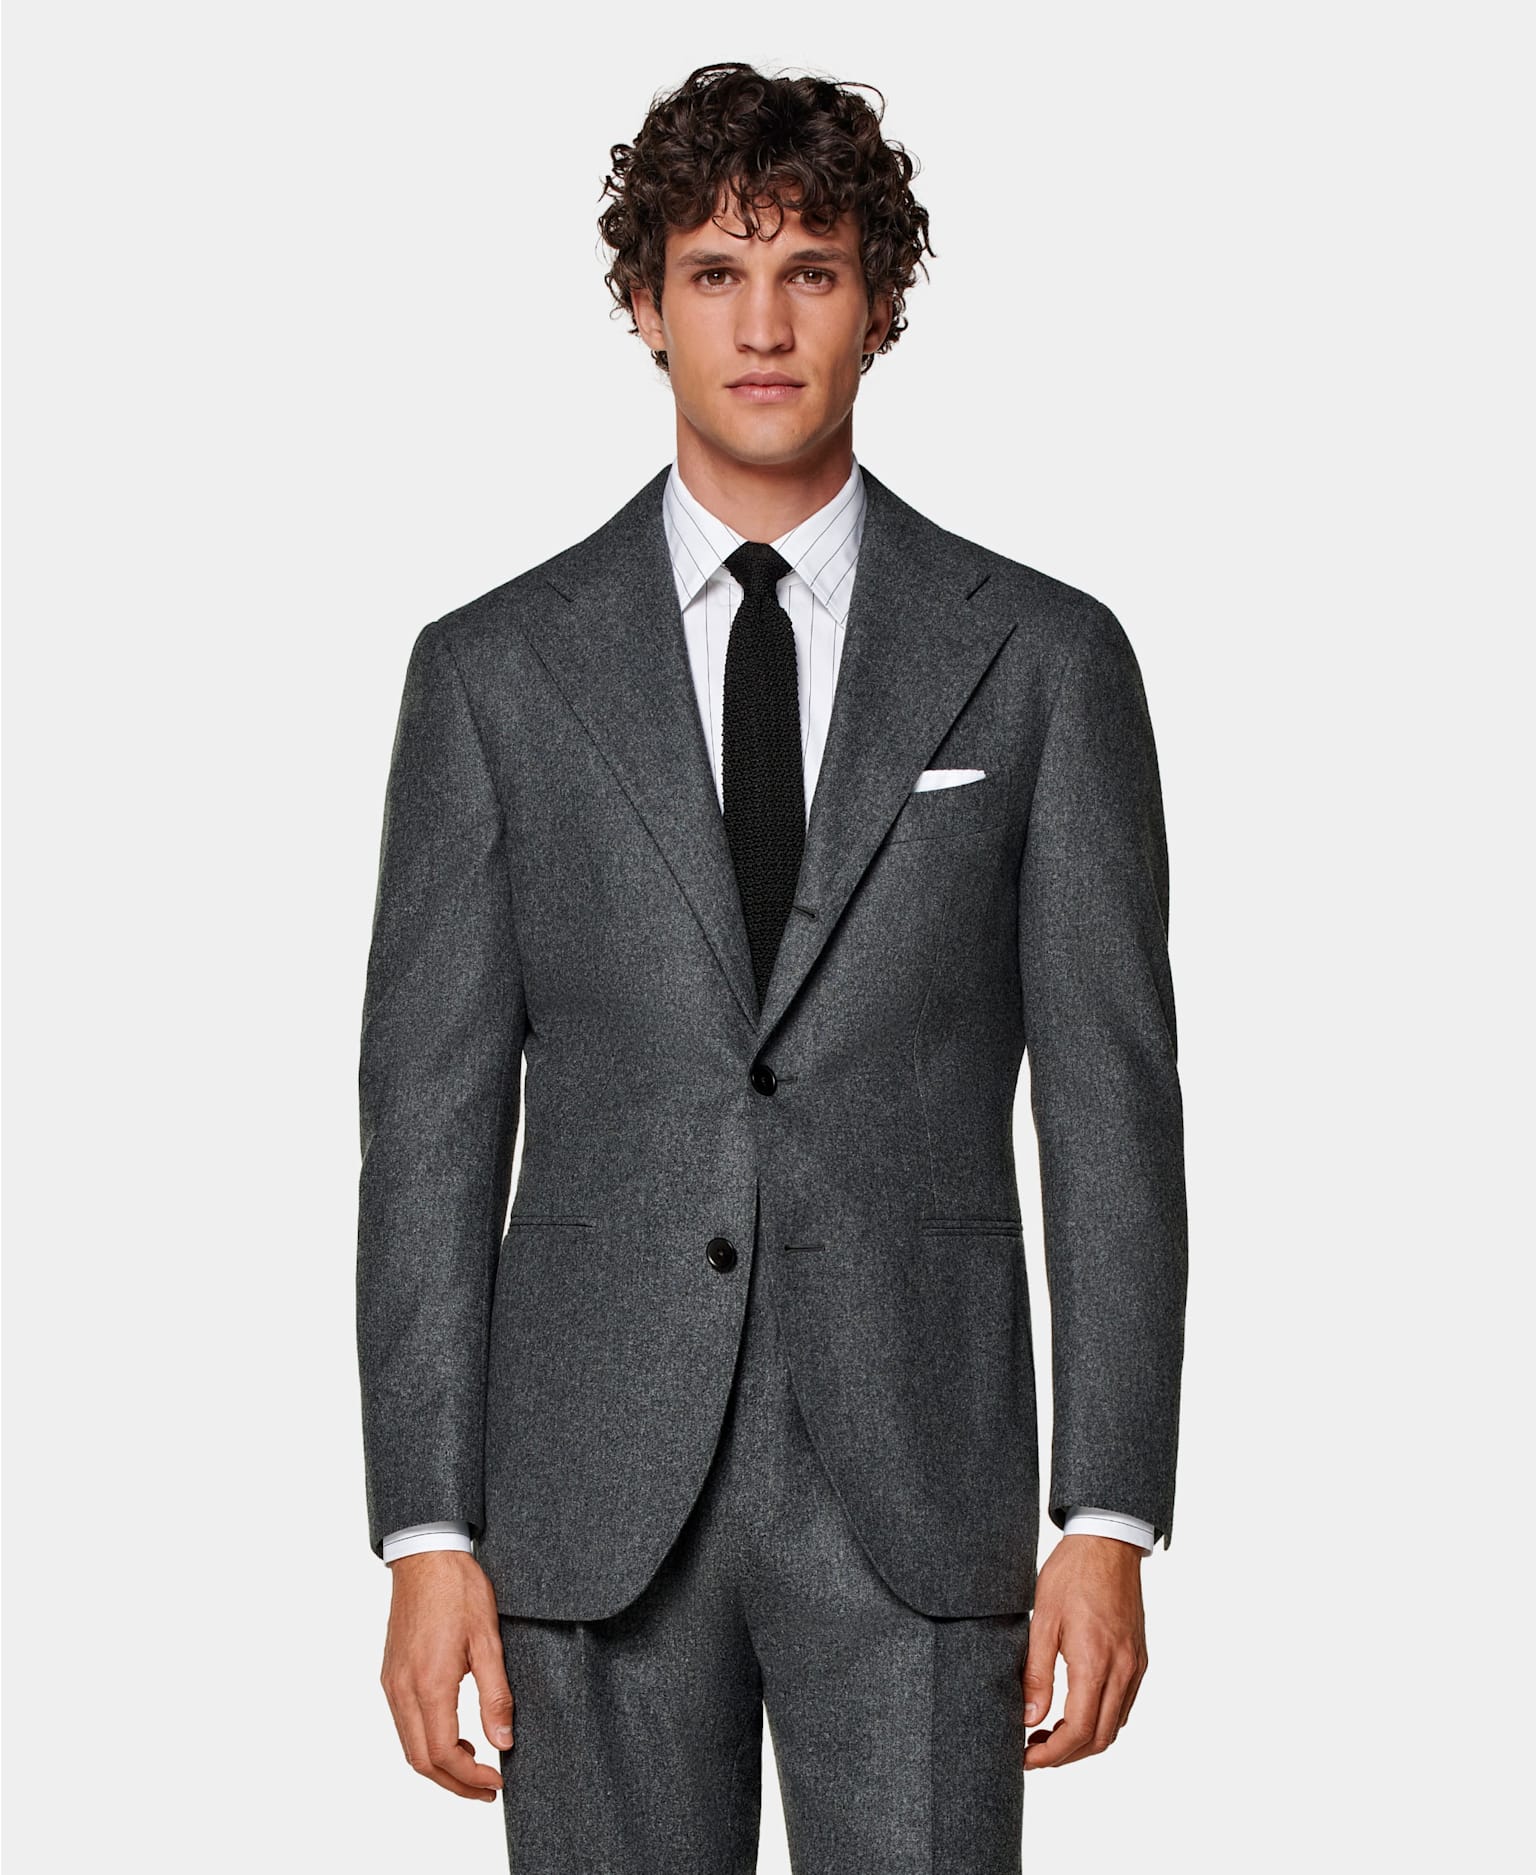 Men’s Wedding Attire by Season | What To Wear | SUITSUPPLY US